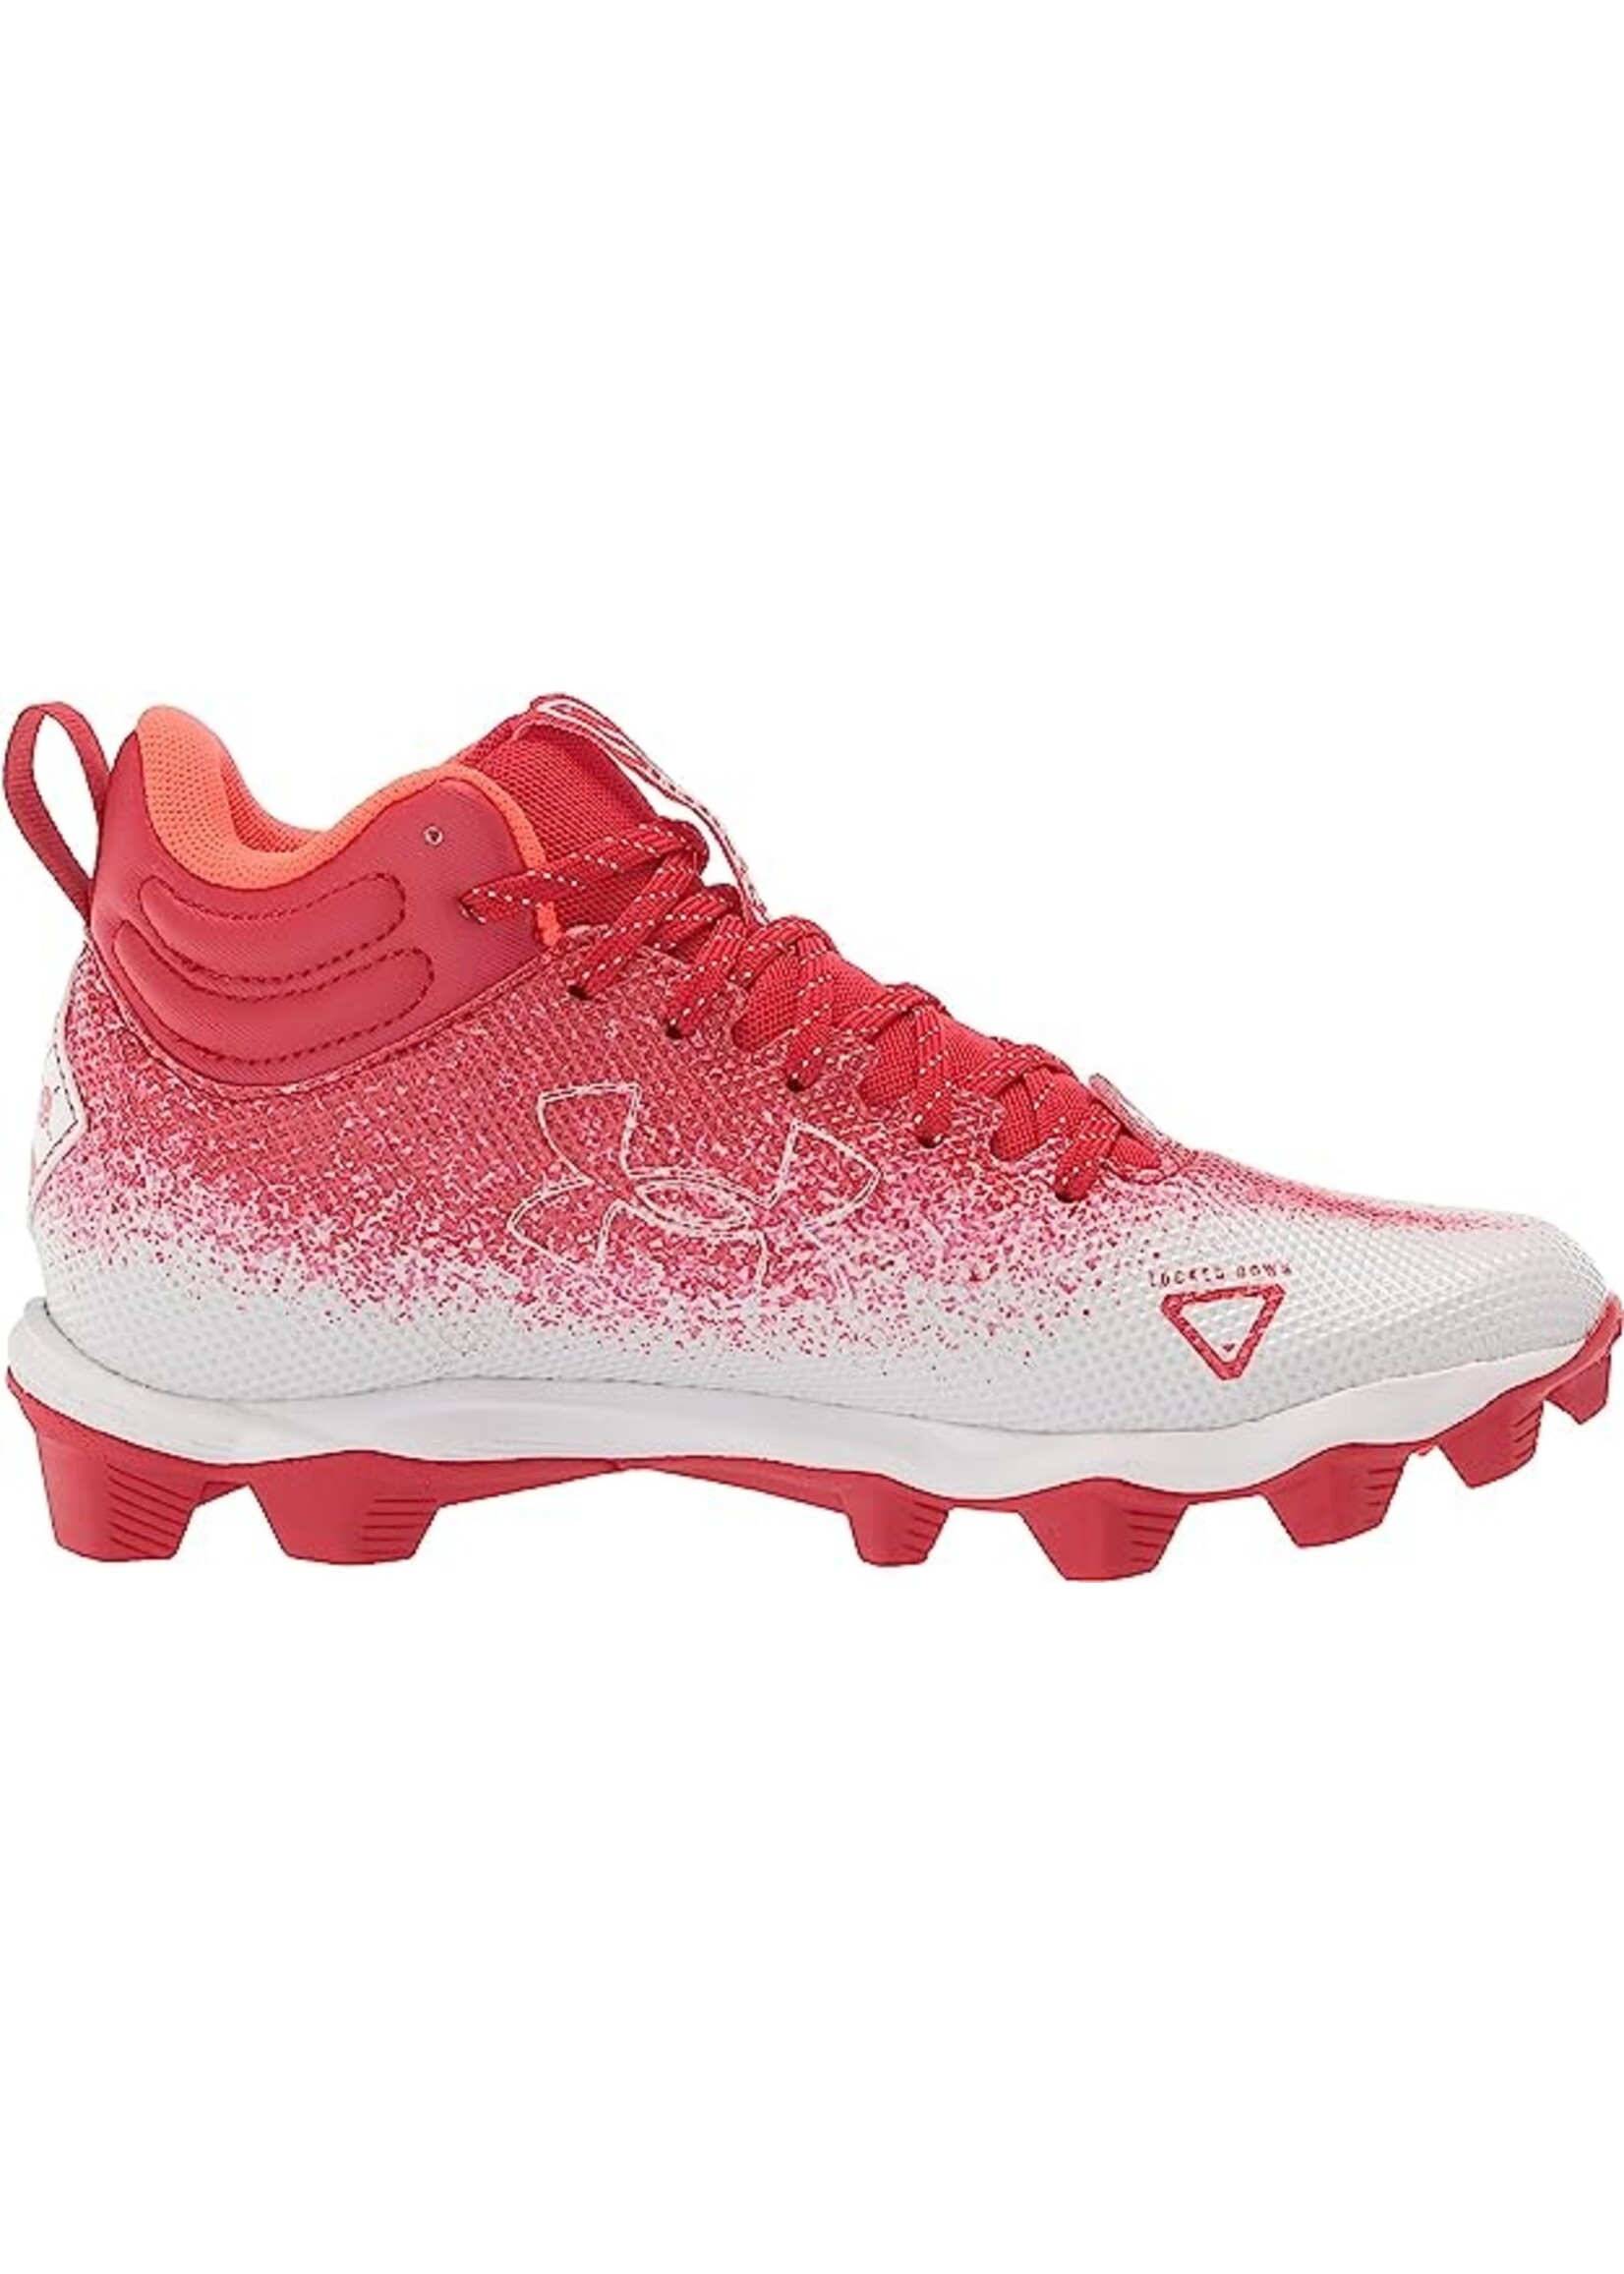 UNDER ARMOUR CRAMPONS FOOTBALL SPOTLIGHT FRANCHISE RM 2.0 JR - Ambiance  Sports